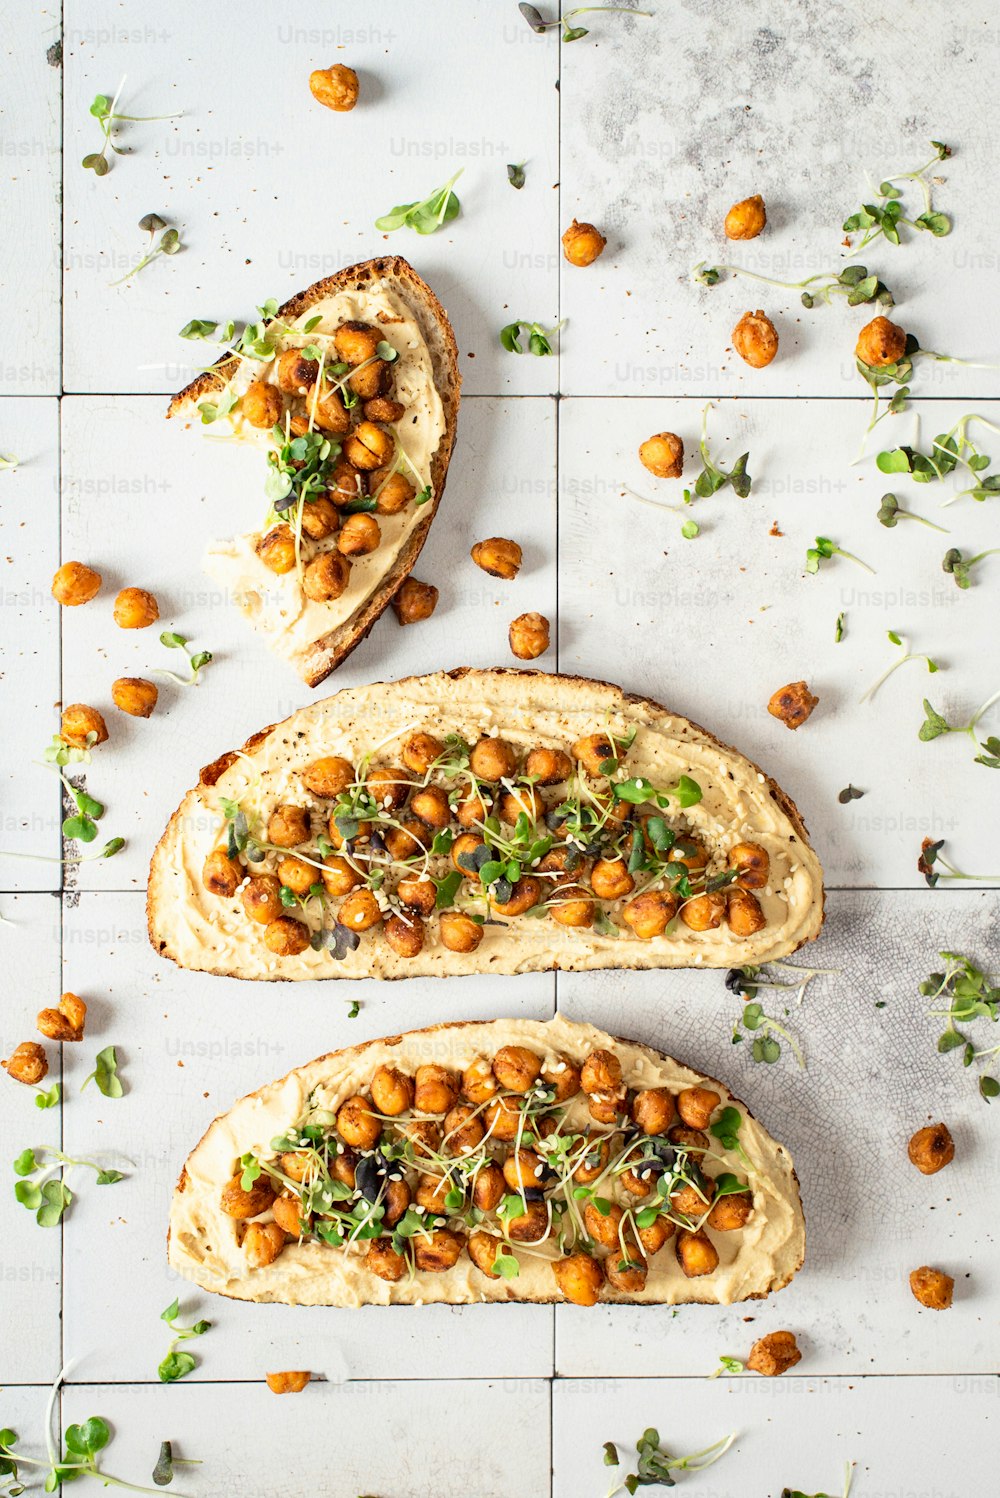 two pieces of bread topped with chickpeas and greens